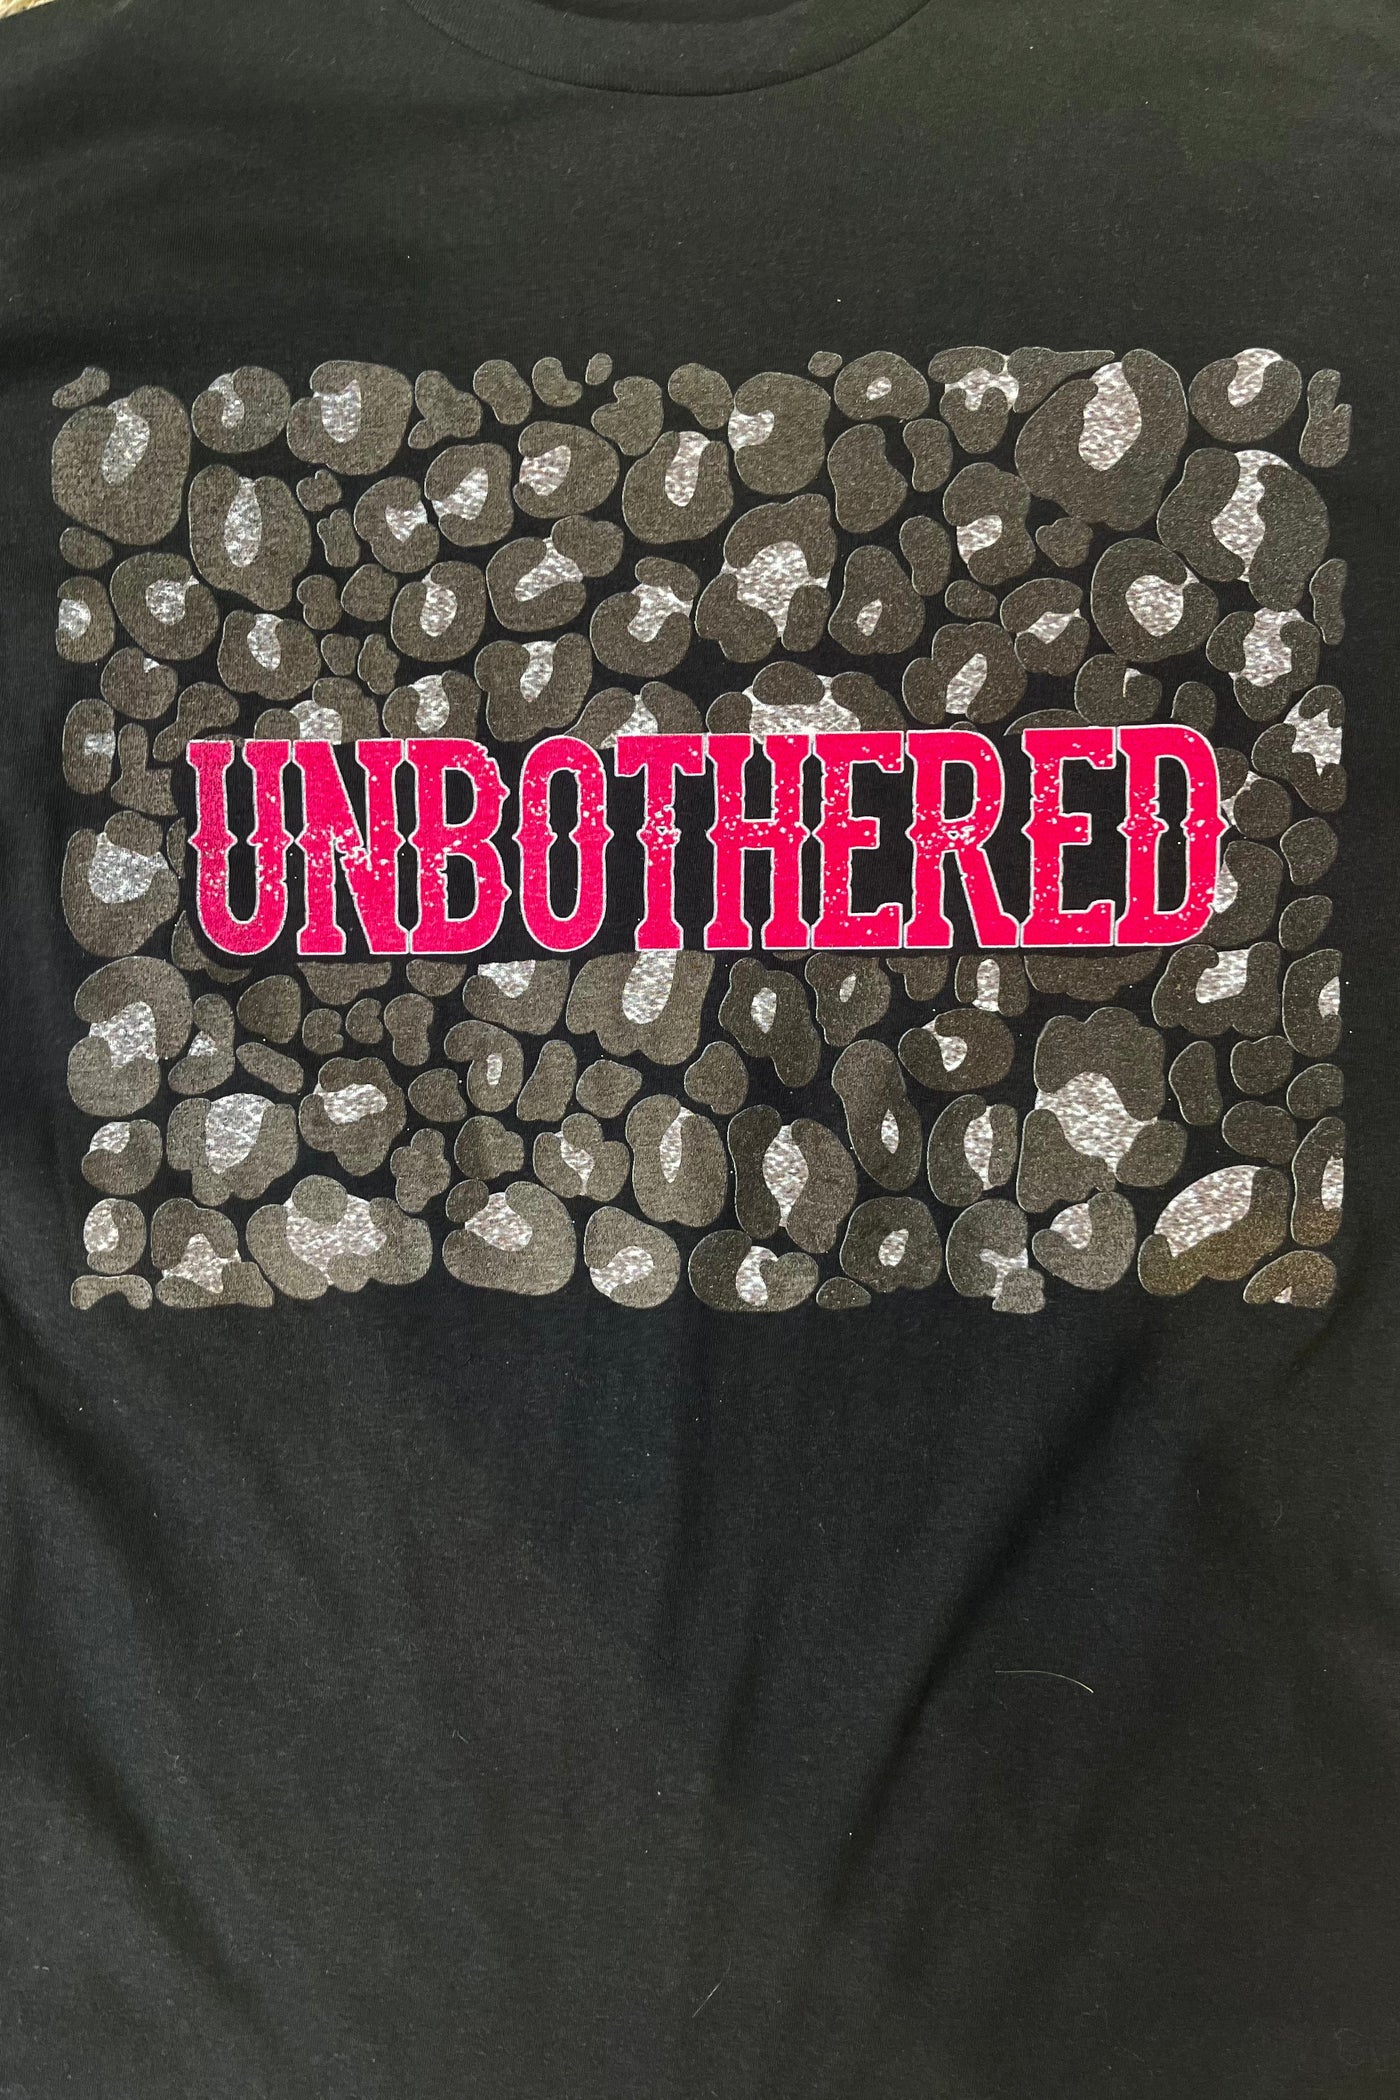 Unbothered Graphic Tee graphic tees Mark tee 